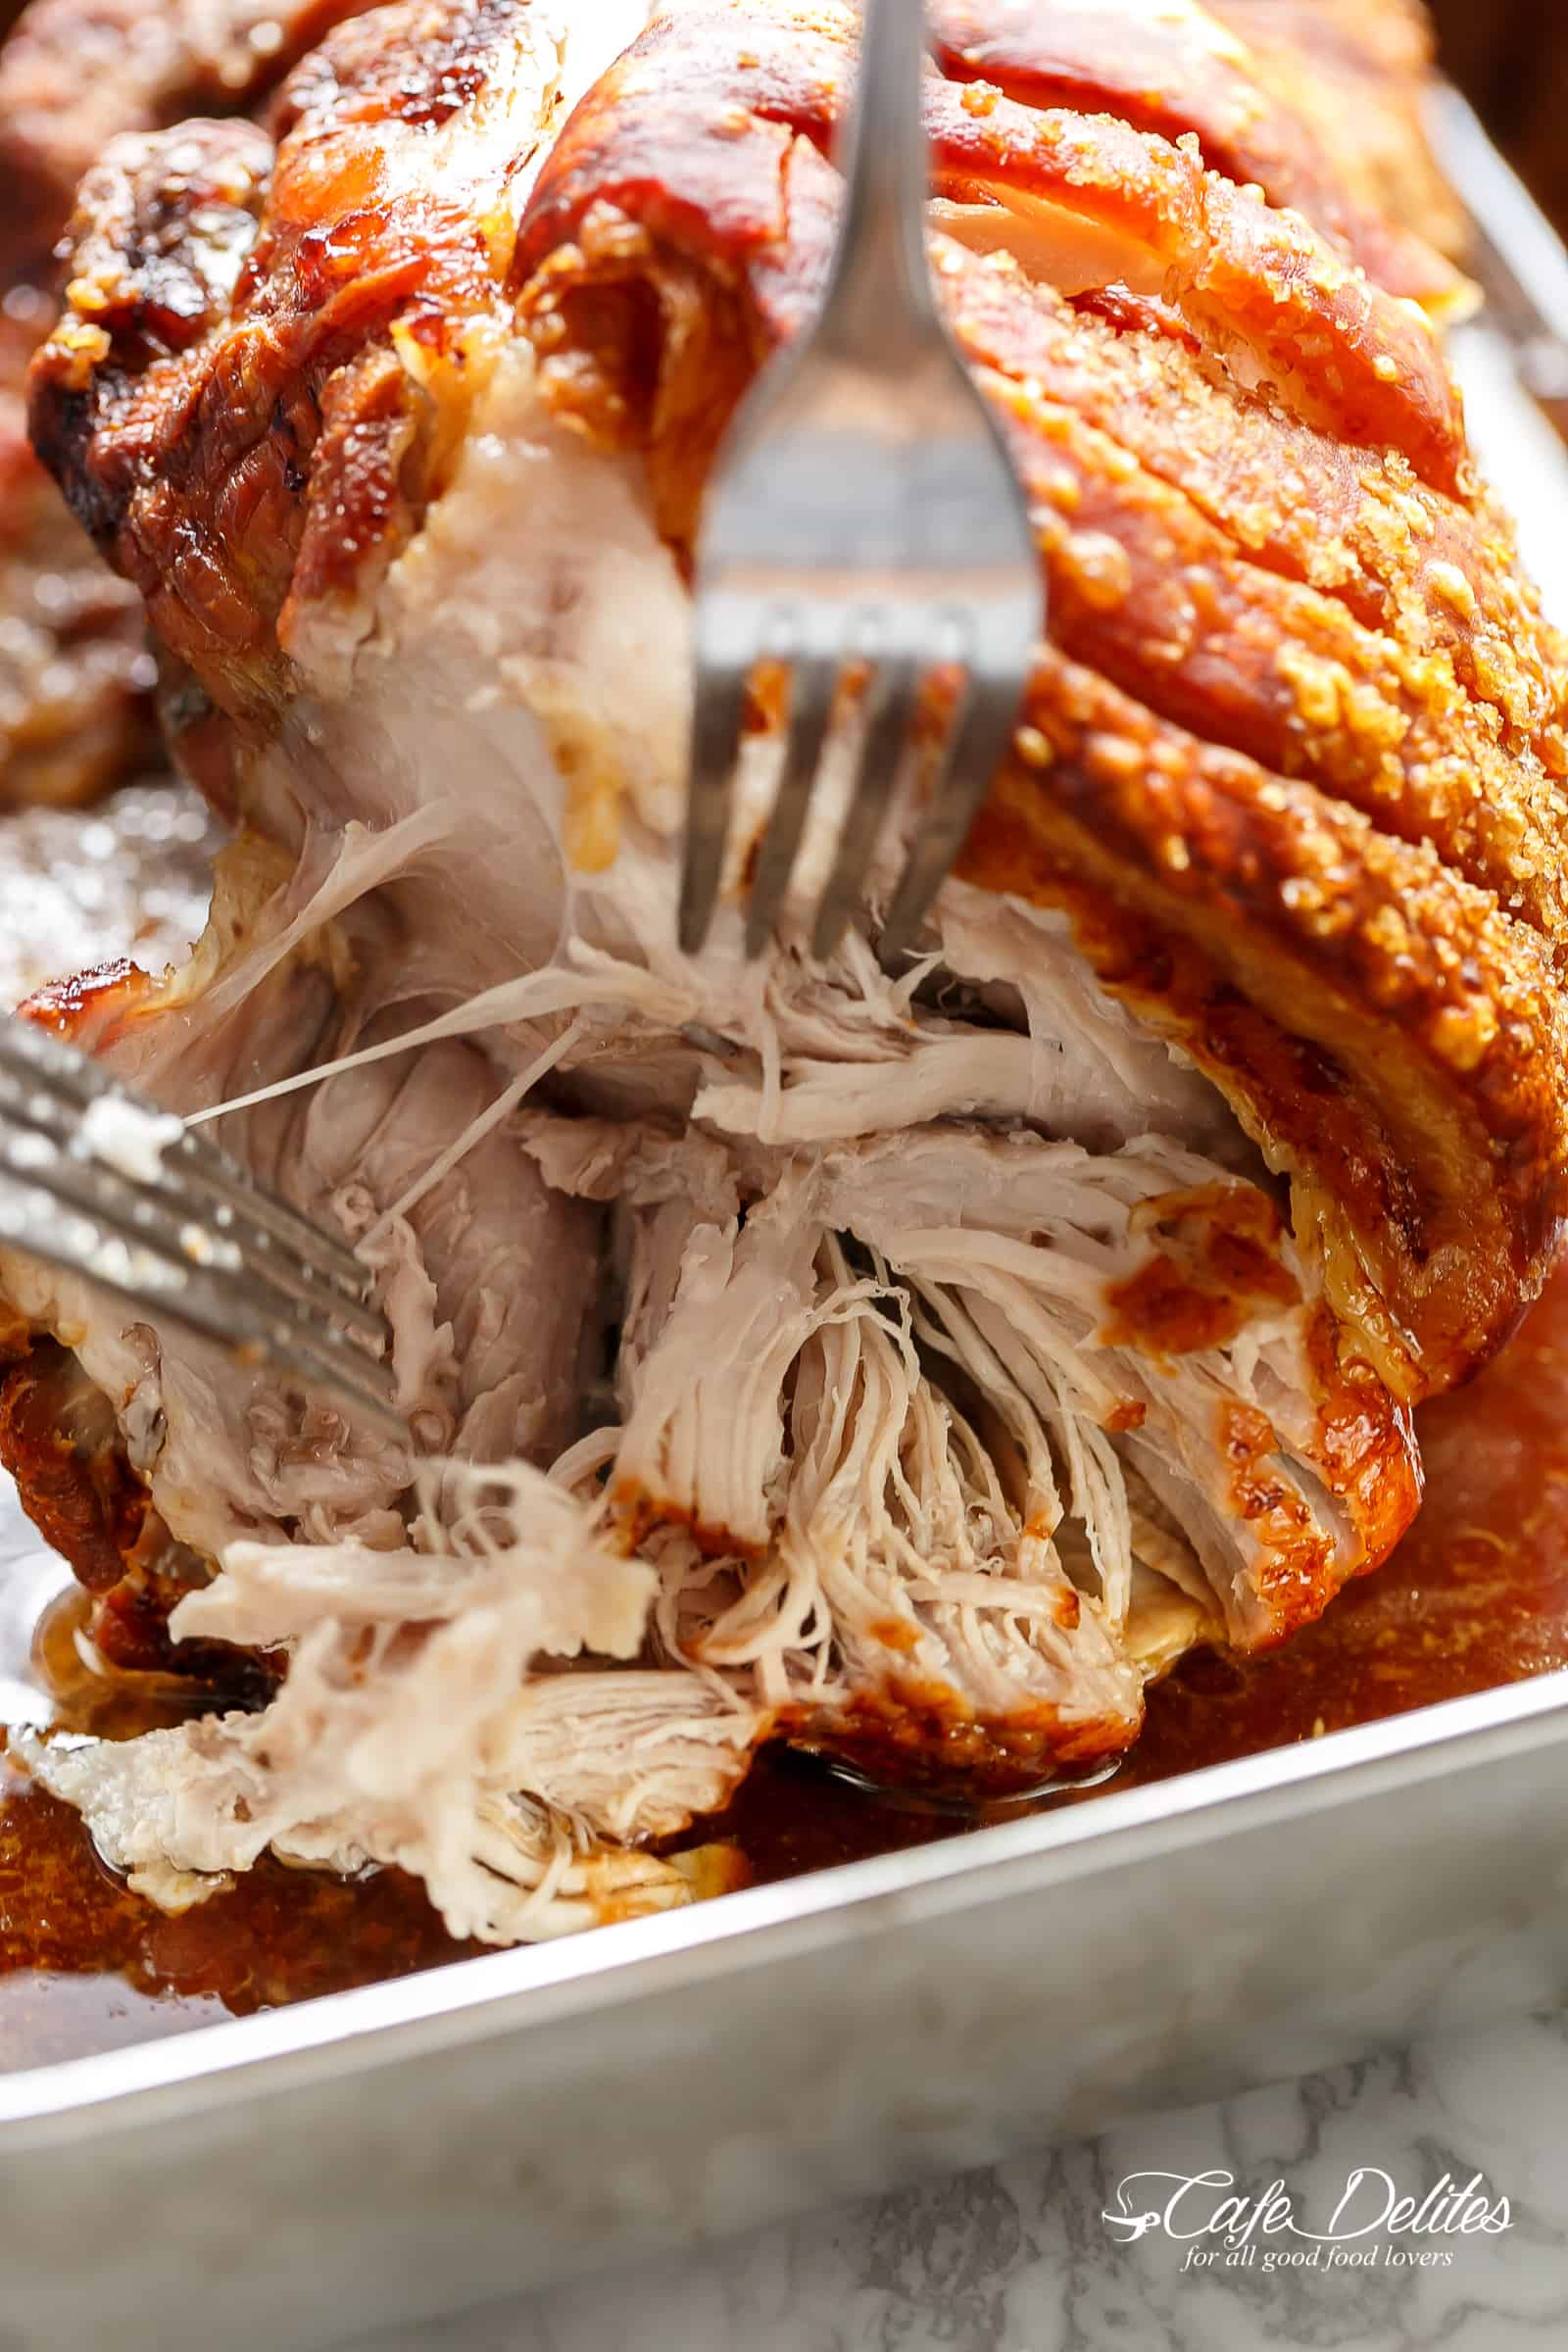 The most perfect pork roast with pork rinds a Hit your weekend or holiday table! Roasting a pork shoulder or butt is very easy, but getting the crunch makes it worth every minute of waiting! #pork #roast #sunday #easyrecipes #dinner | cafedelites.com